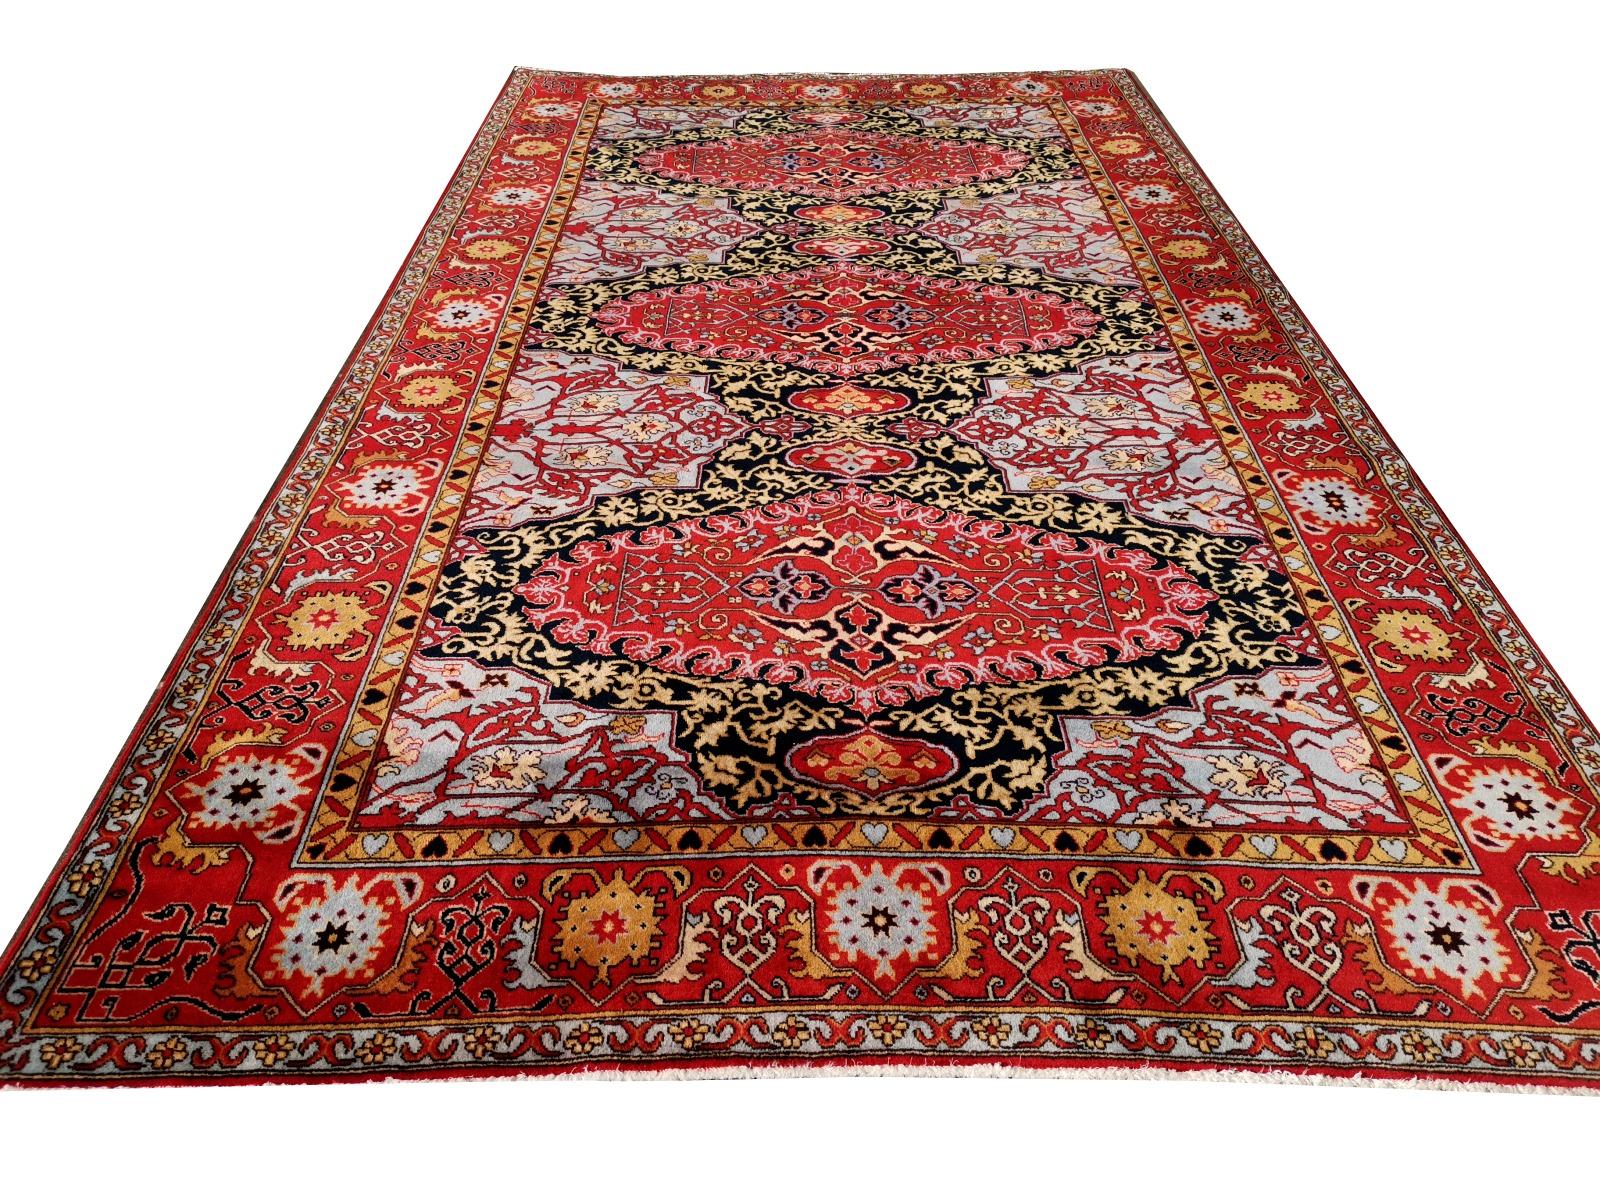 This Turkish Oushak rug is a 1970s made rug with traditional Medaillon Design from the 17th century. Typical is the narrow and long size. It was hand knotted using fine wool. The colors are vibrant, and the rug is in very good condition.

Origin: